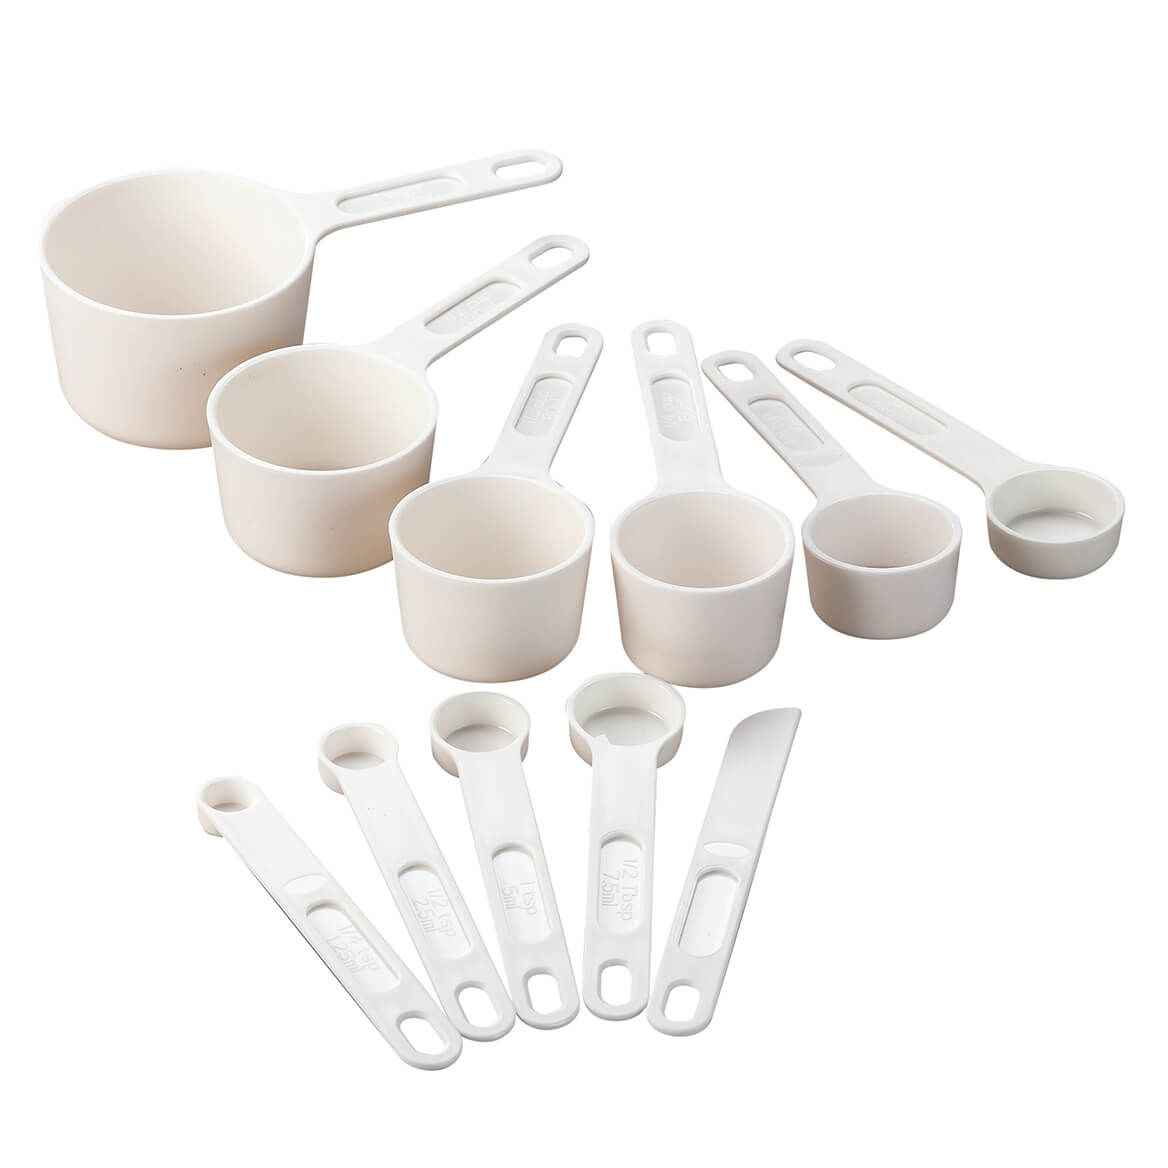 11-Pc. White Measuring Cup/Spoon Set + '-' + 376910